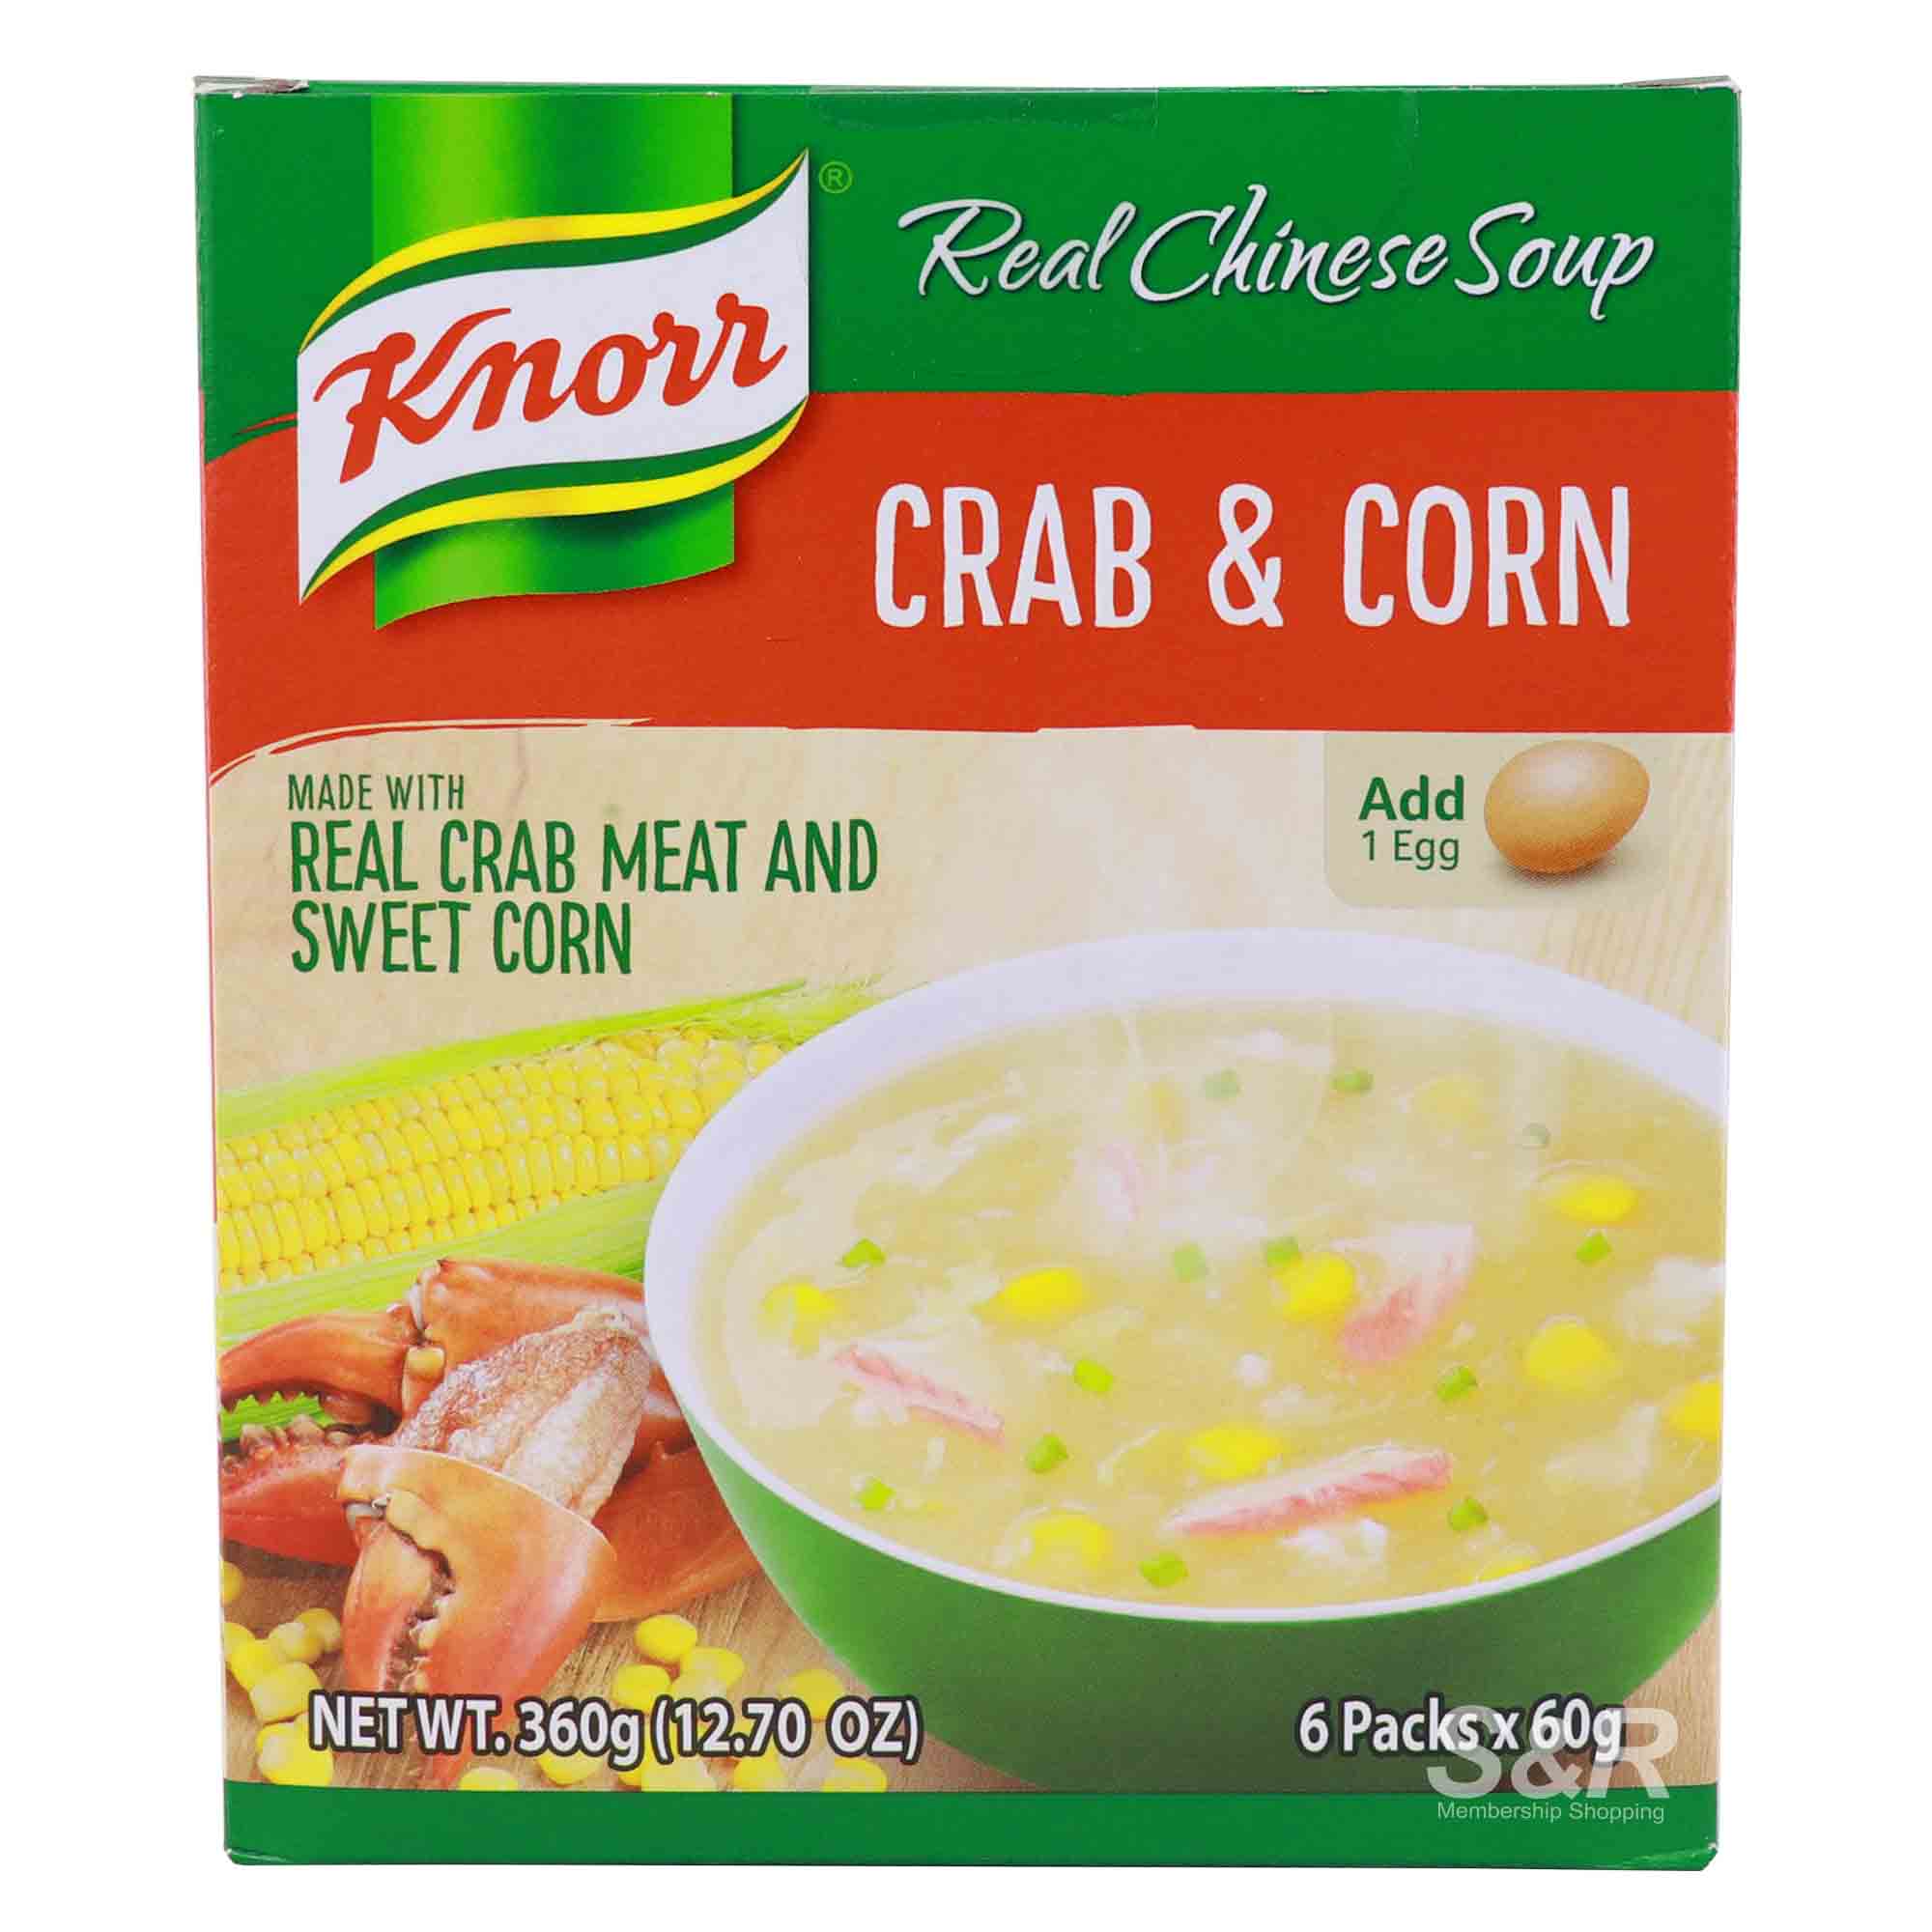 Knorr Real Chinese Soup Crab and Corn 6pcs